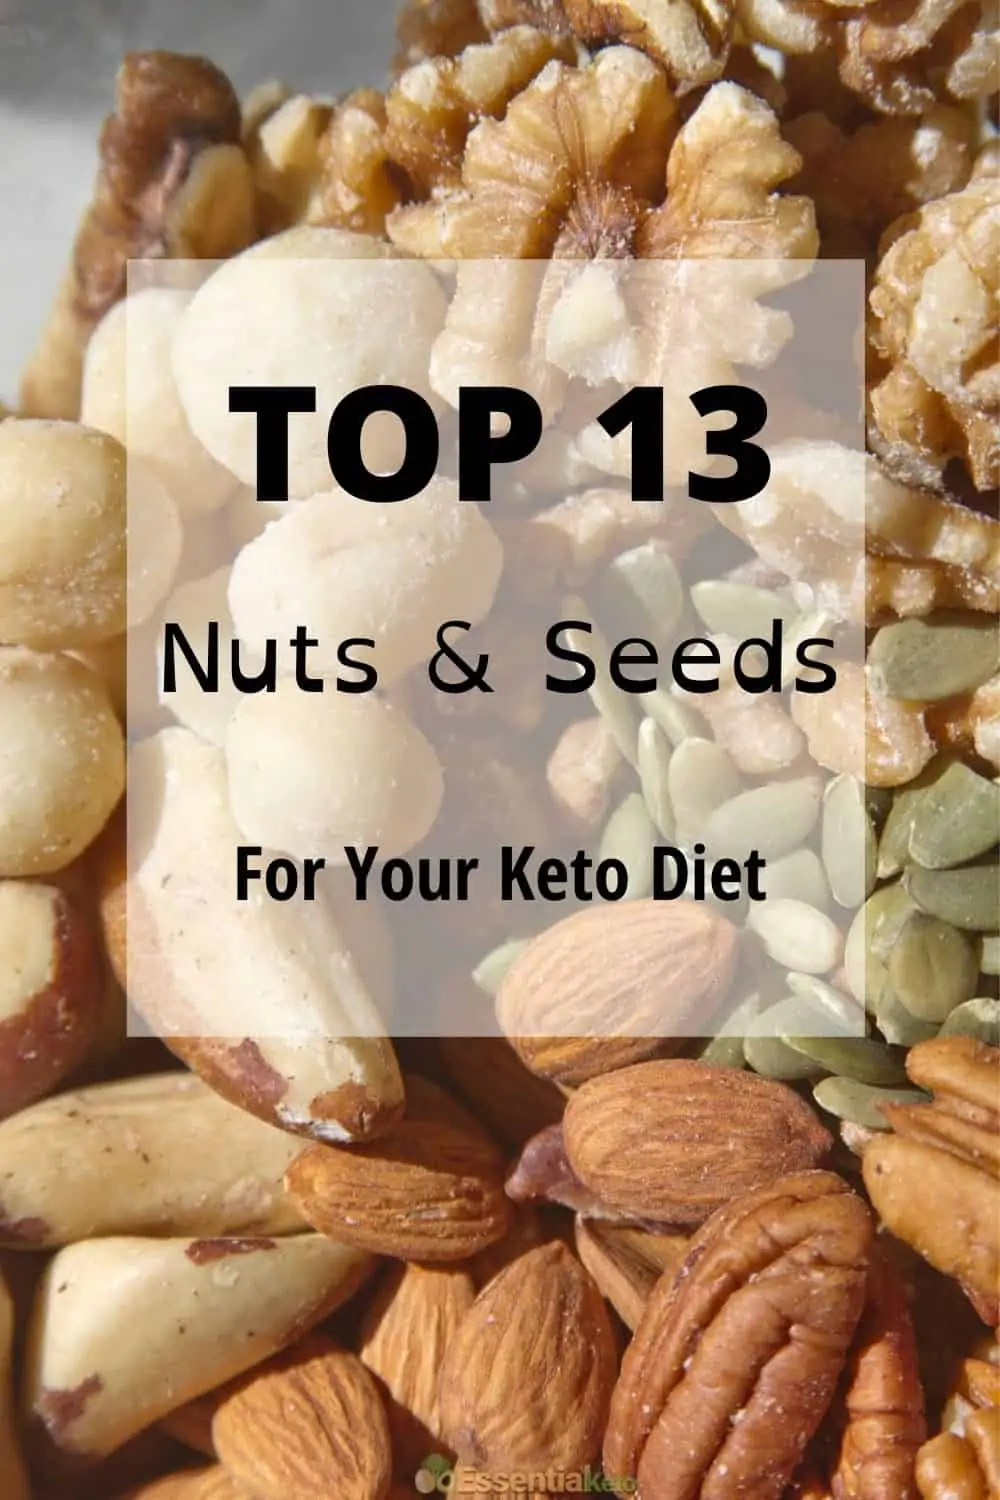 Top 13 Nuts and Seeds for Keto Diet